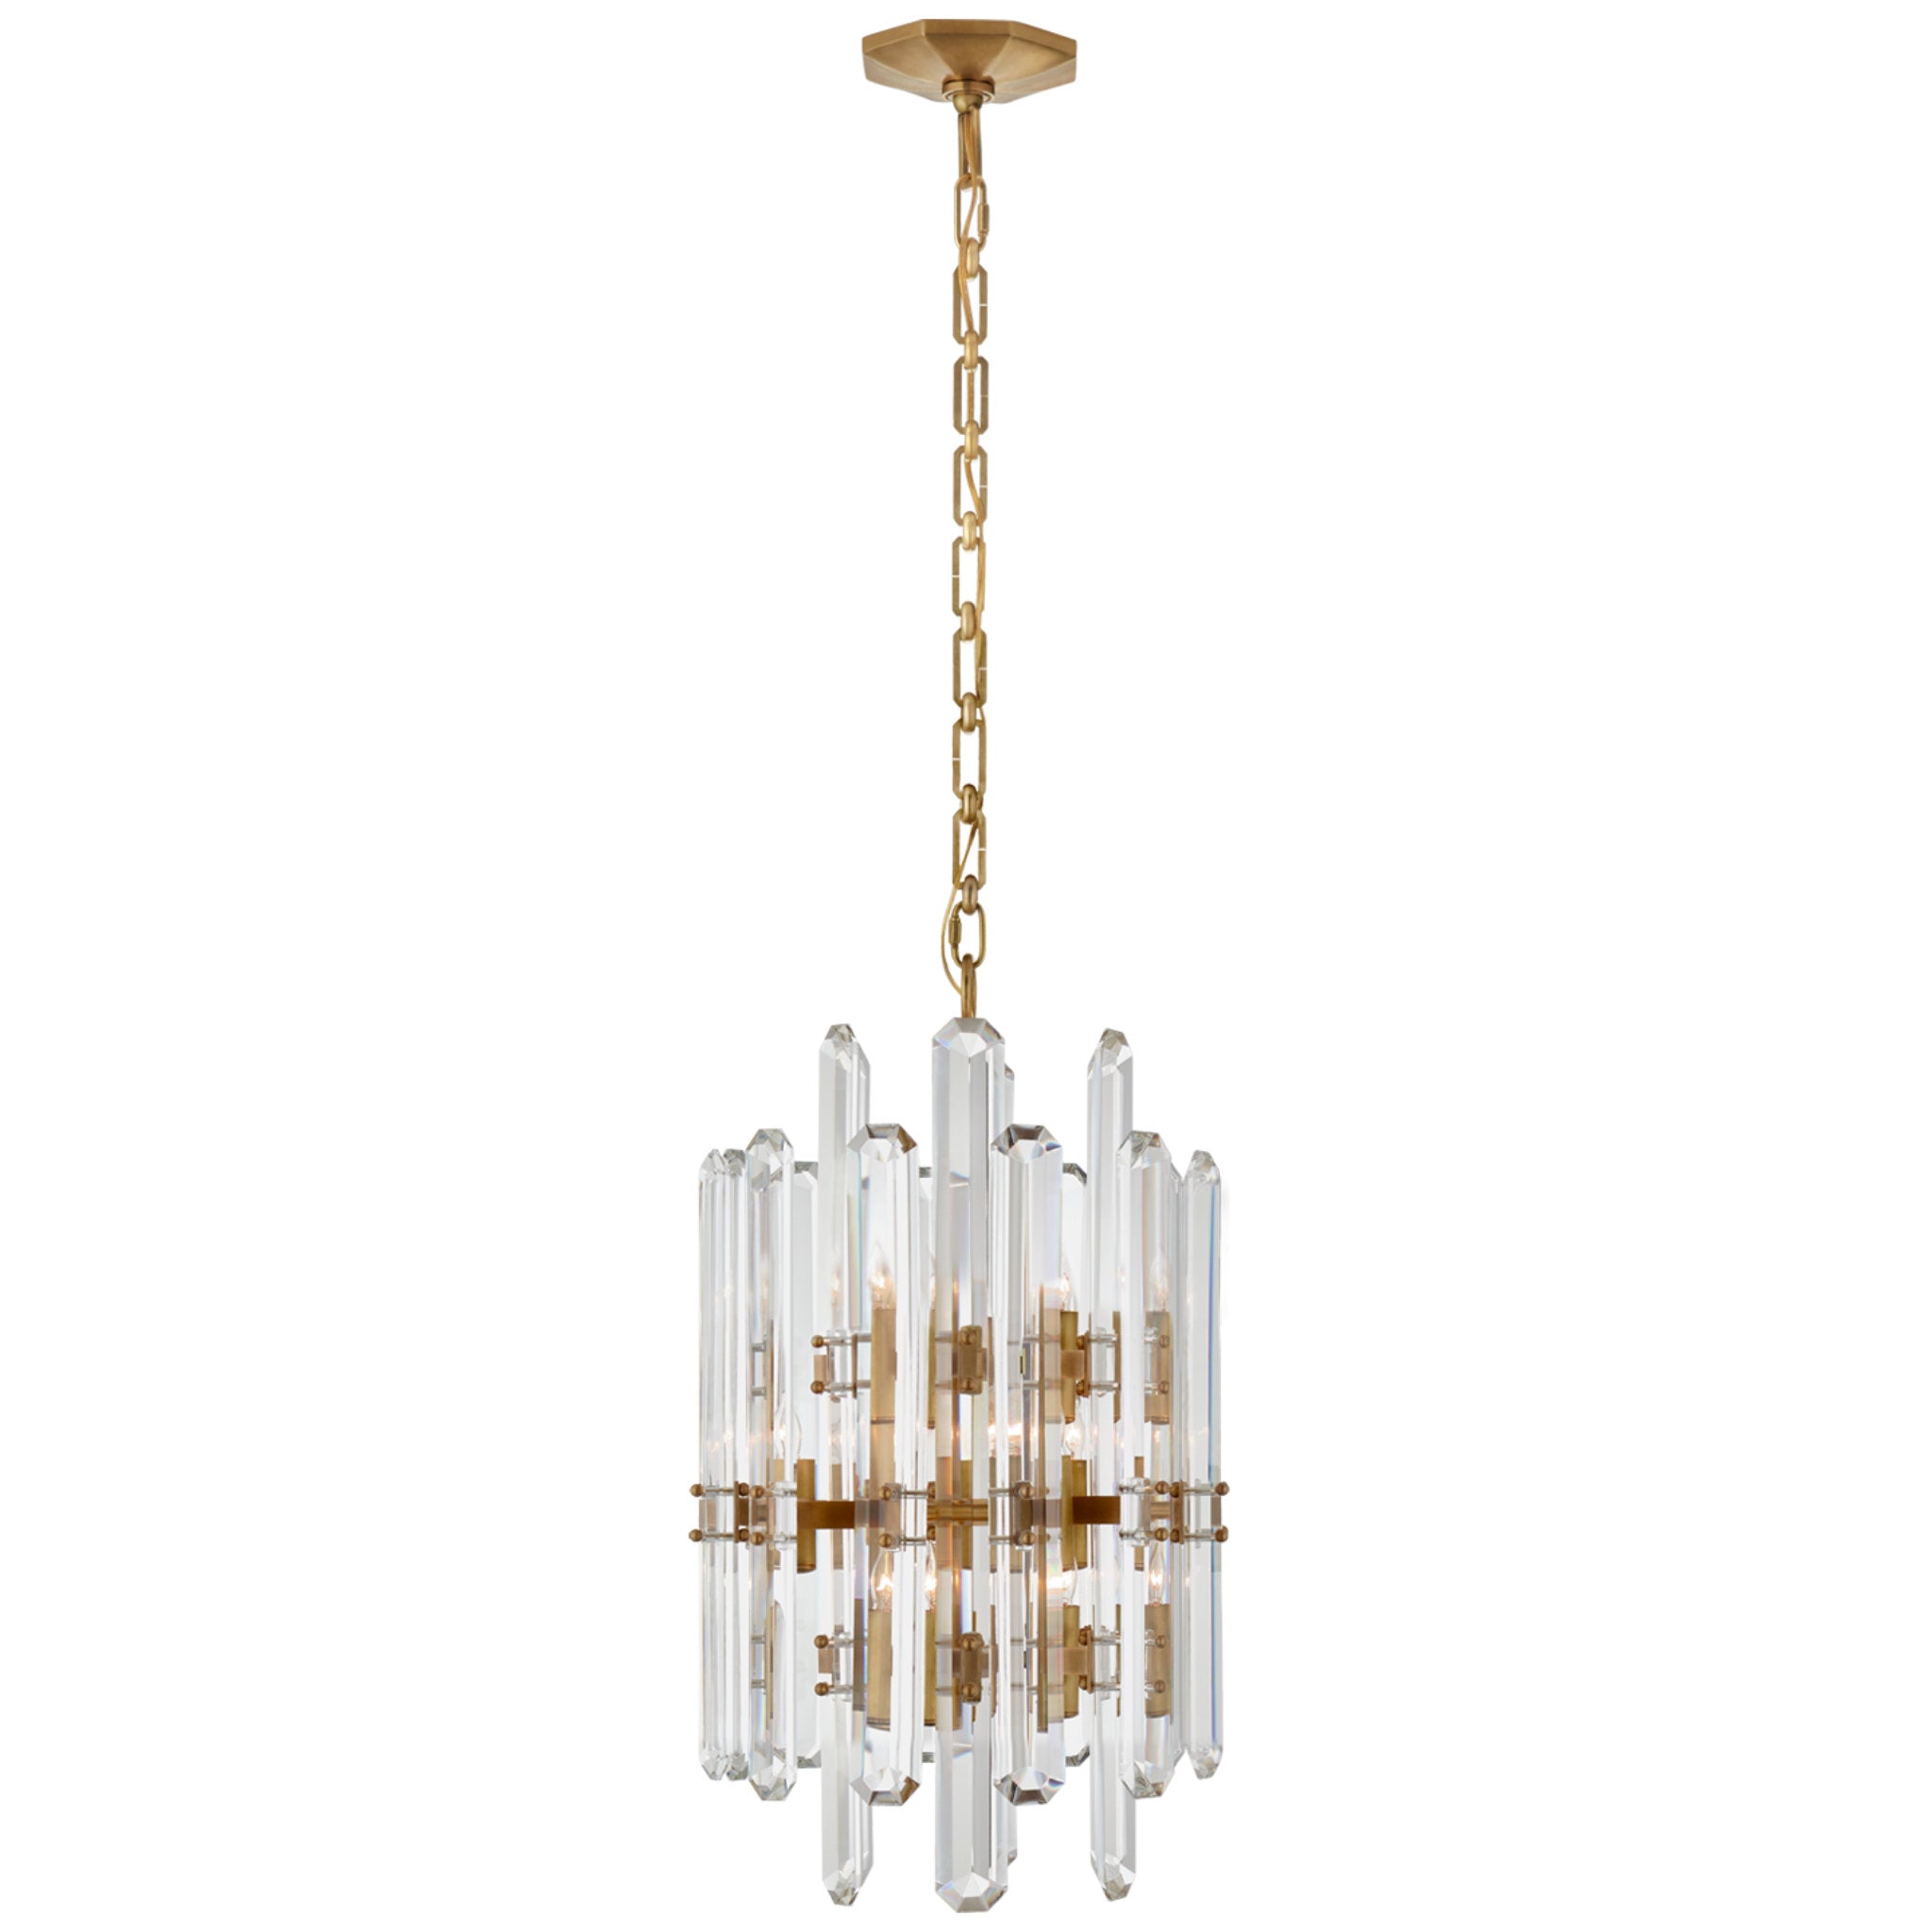 ARN5262HABCG by Visual Comfort - Turenne Large Dynamic Chandelier in  Hand-Rubbed Antique Brass with Clear Glass